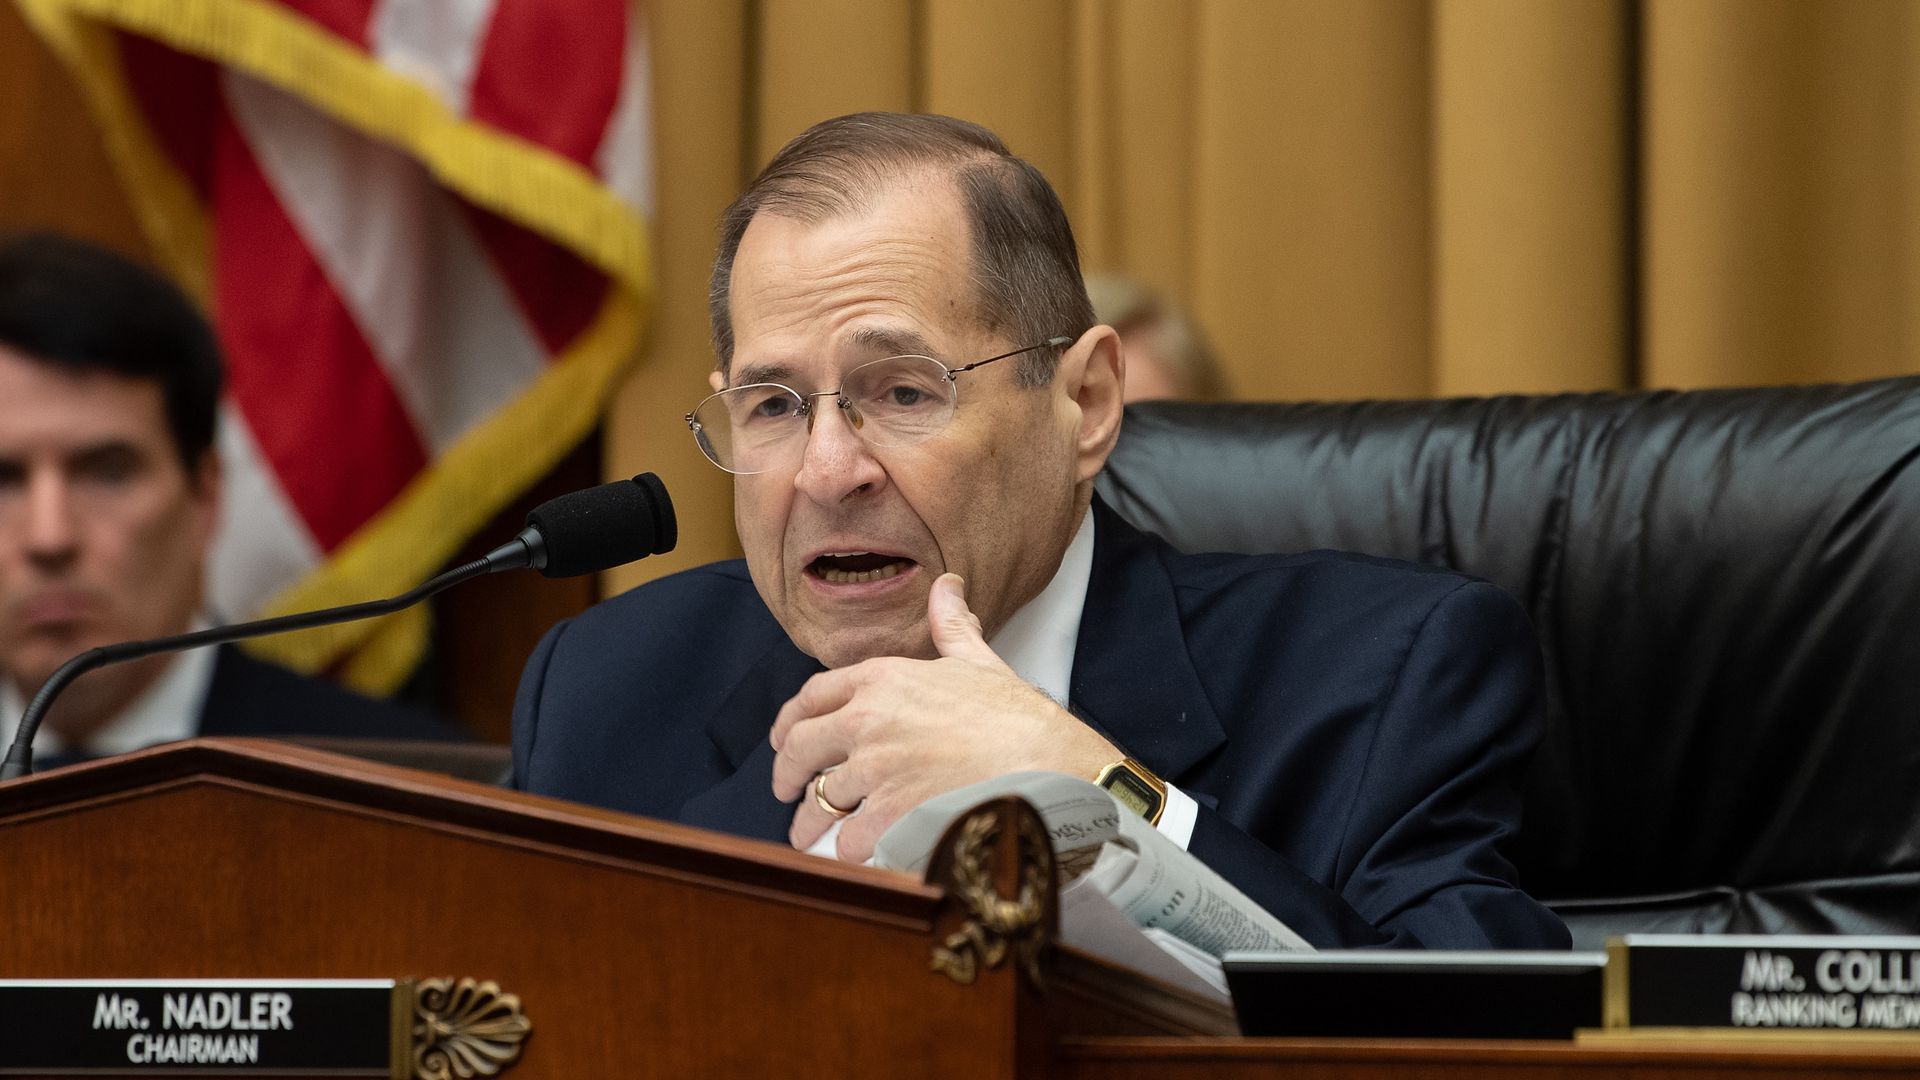 Jerry Nadler speaks during a markup of a resolution supporting the committee report on Attorney General William Barr's failure to produce the unredacted Mueller report.